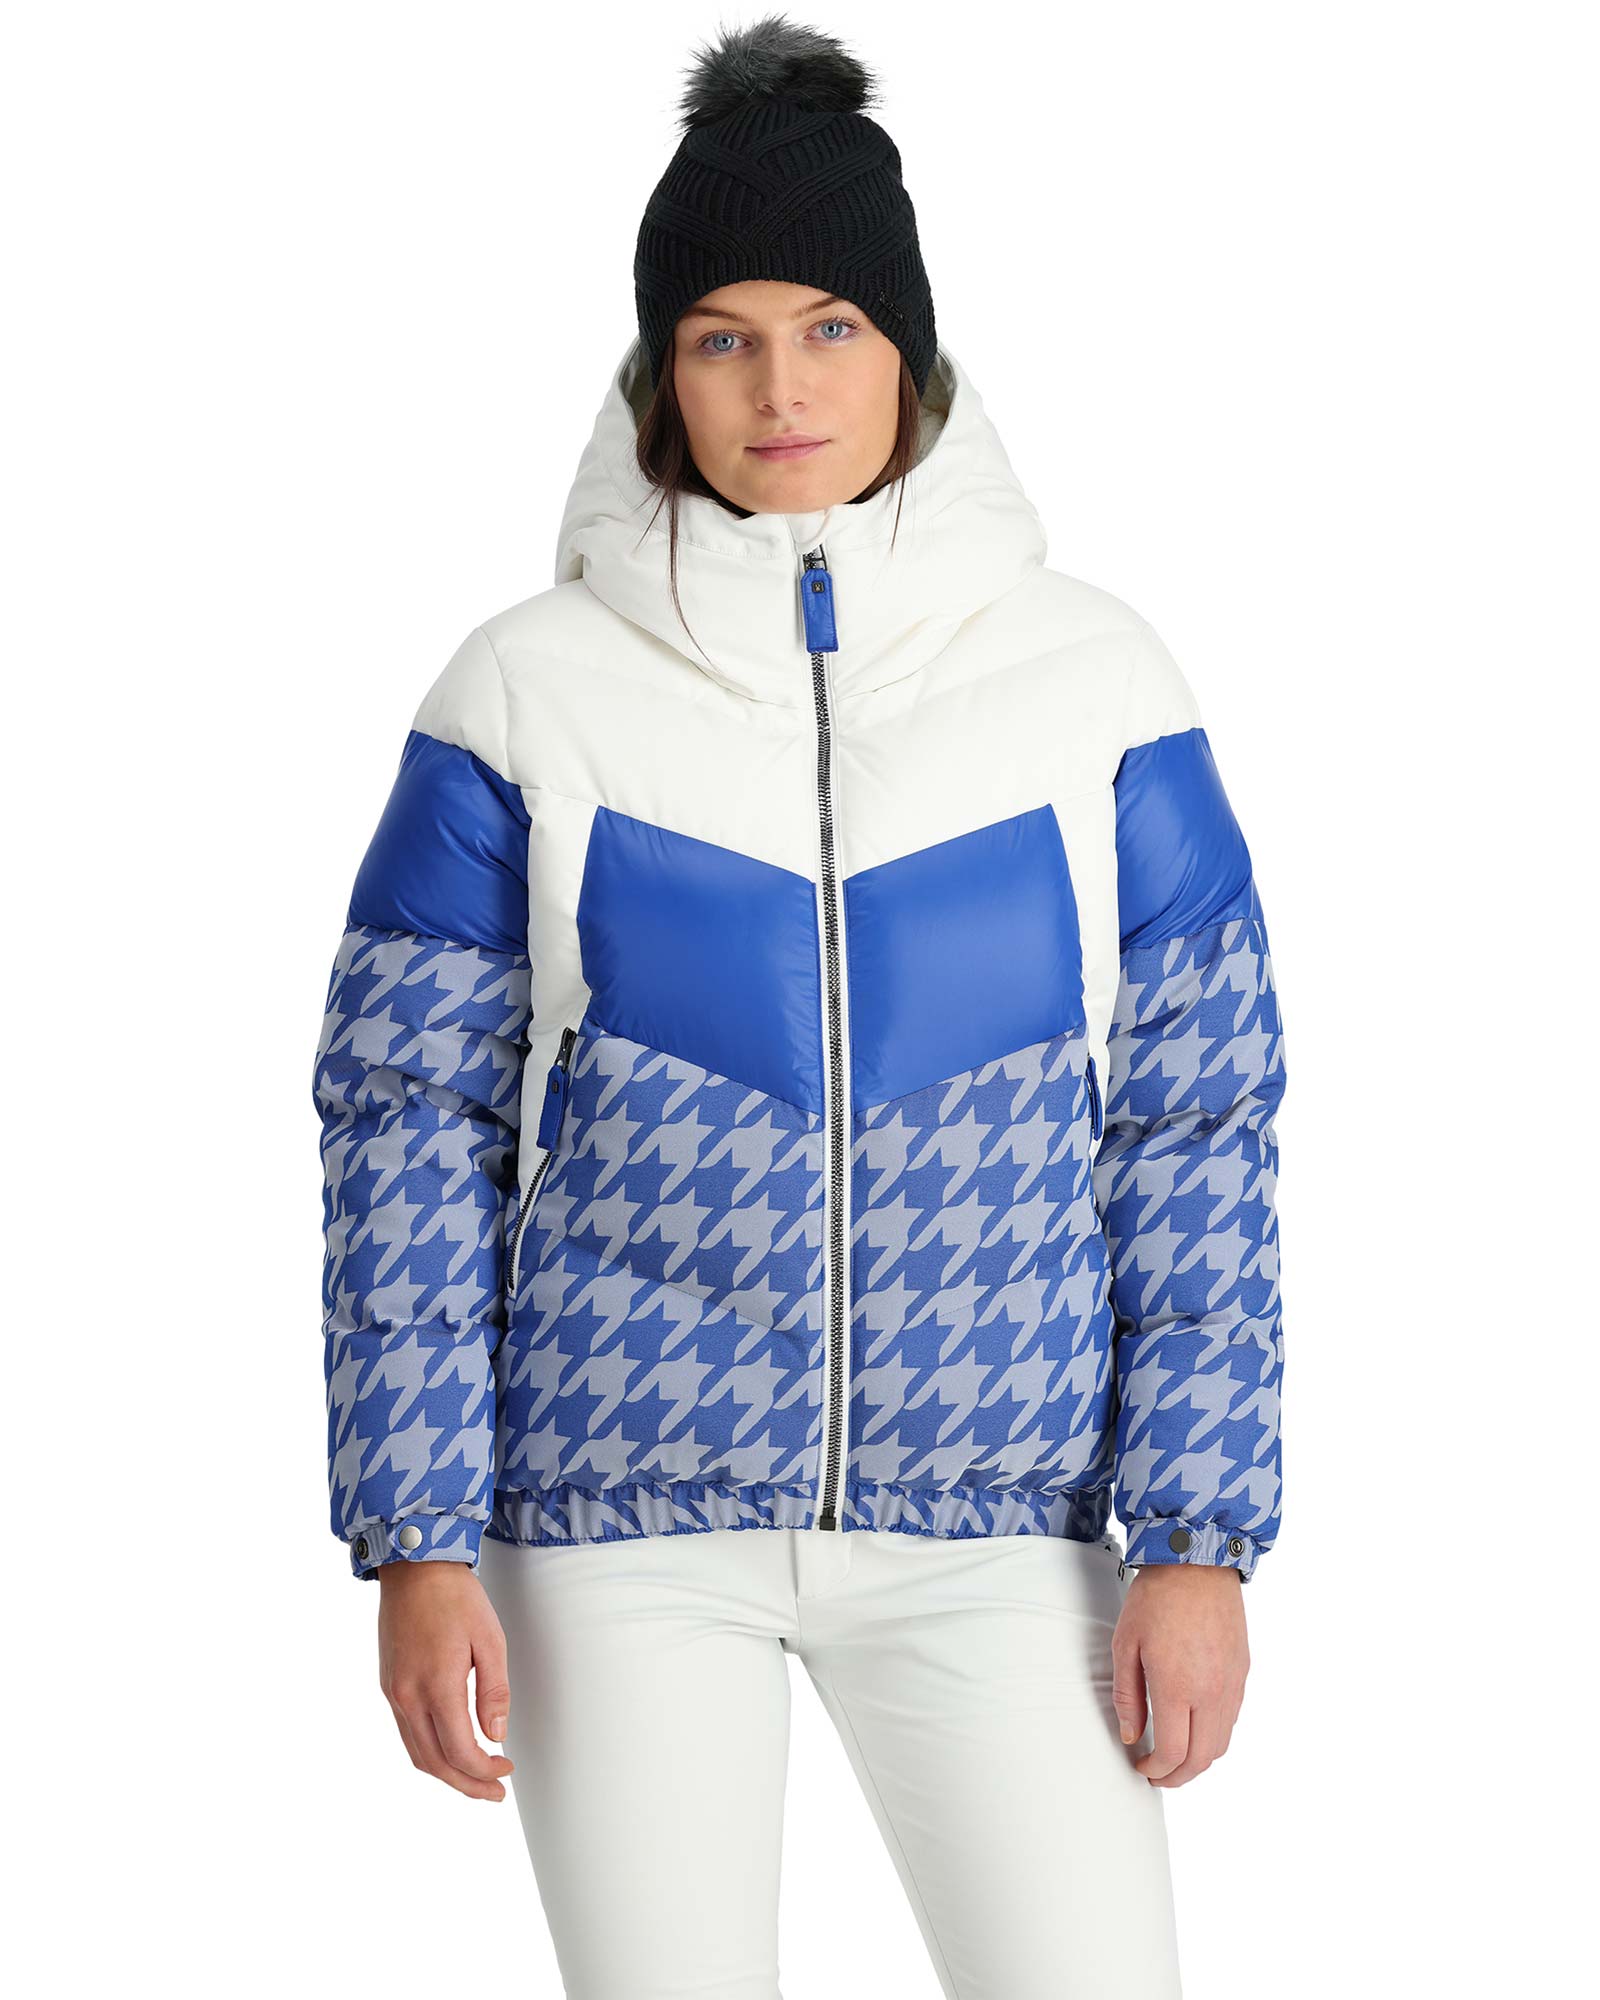 Spyder Women’s Eastwood Down Jacket - Electric Blue Houndstooth Print XL